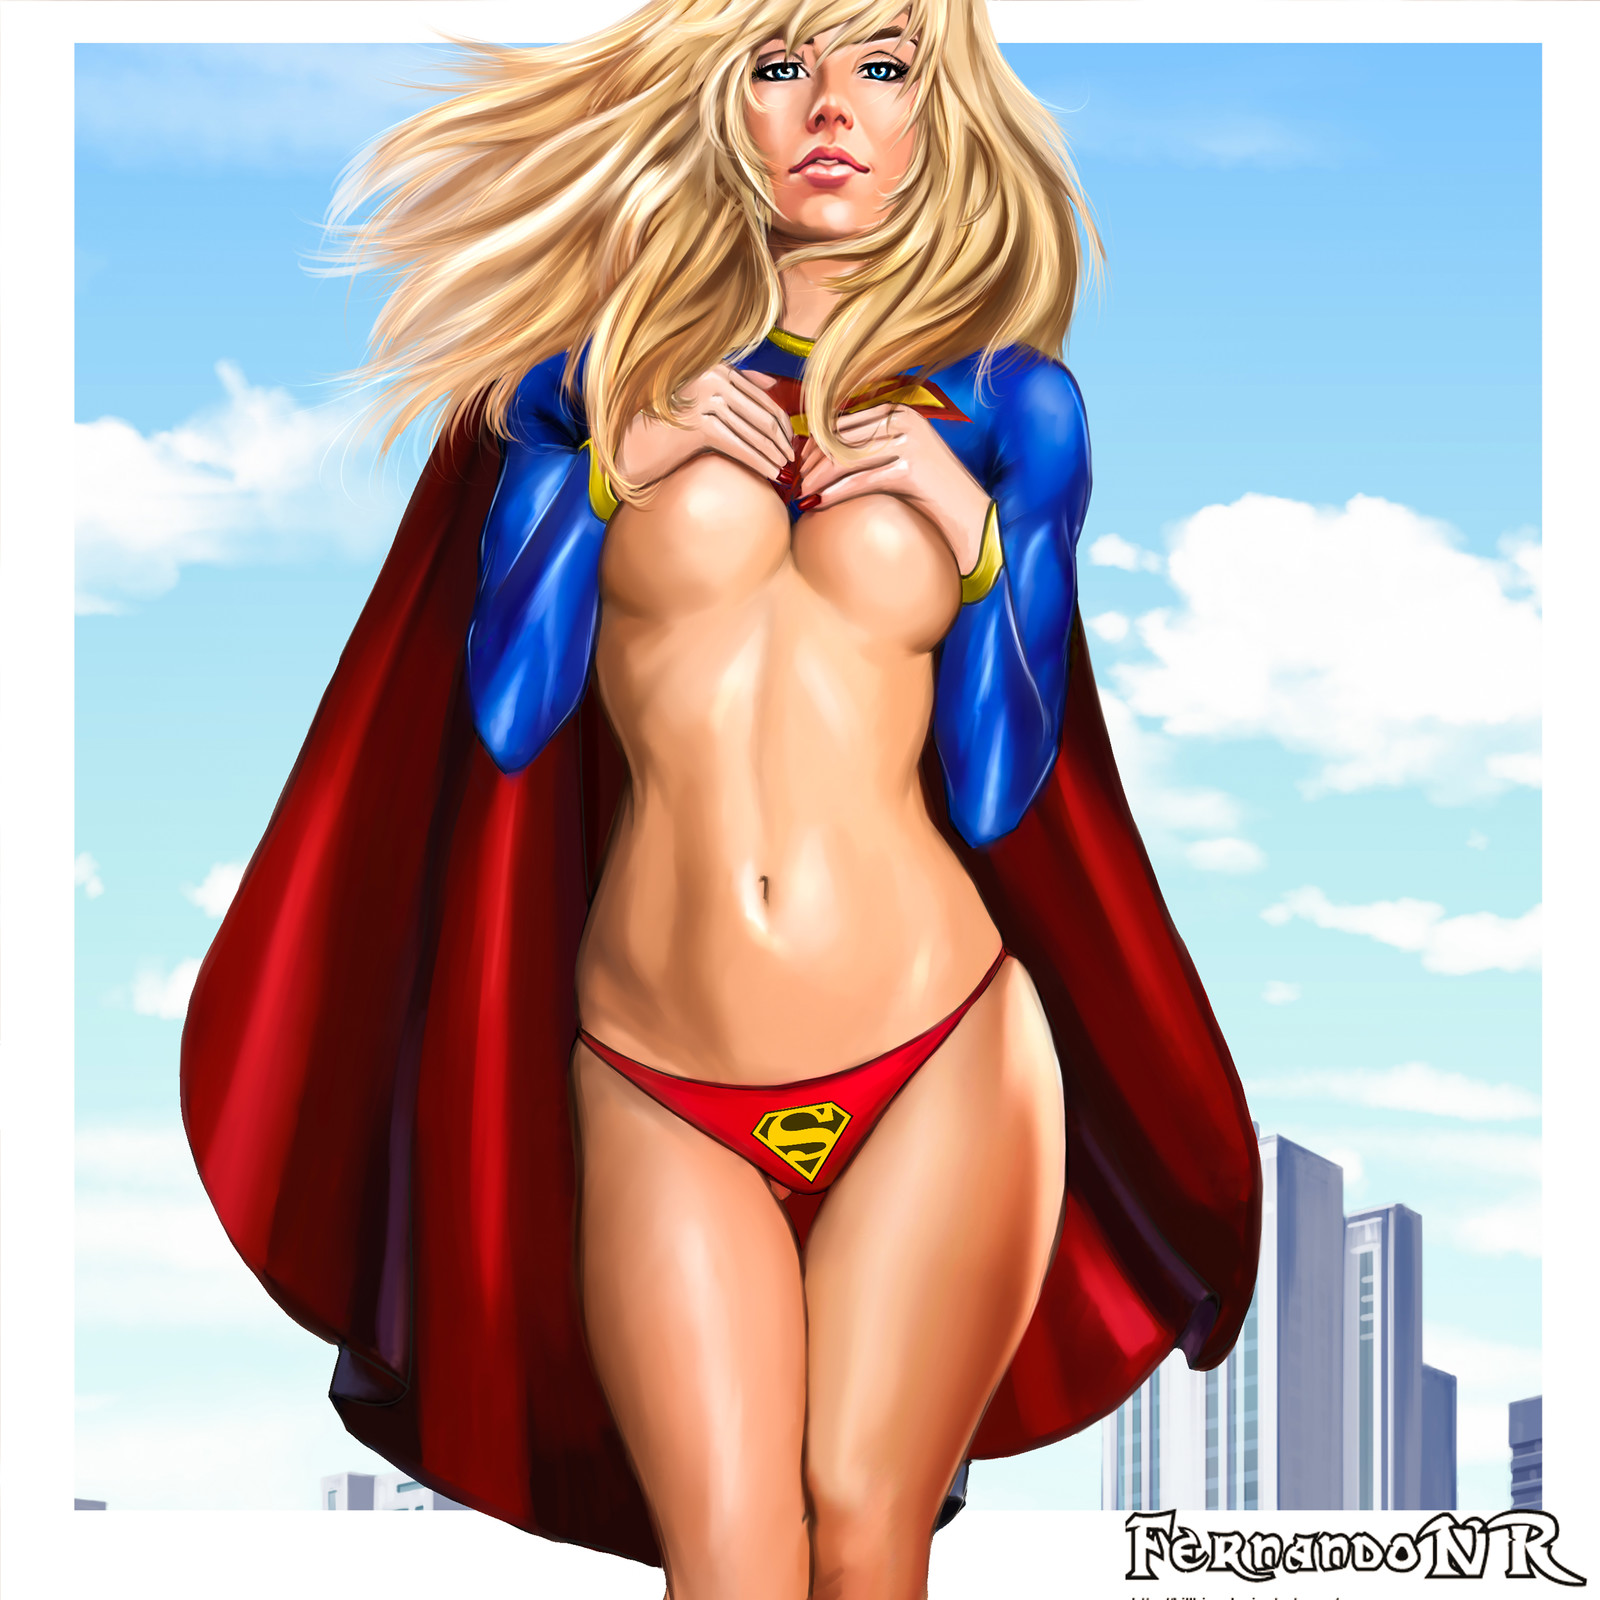 supergirl, images, image, wallpaper, photos, photo, photograph, gallery, su...